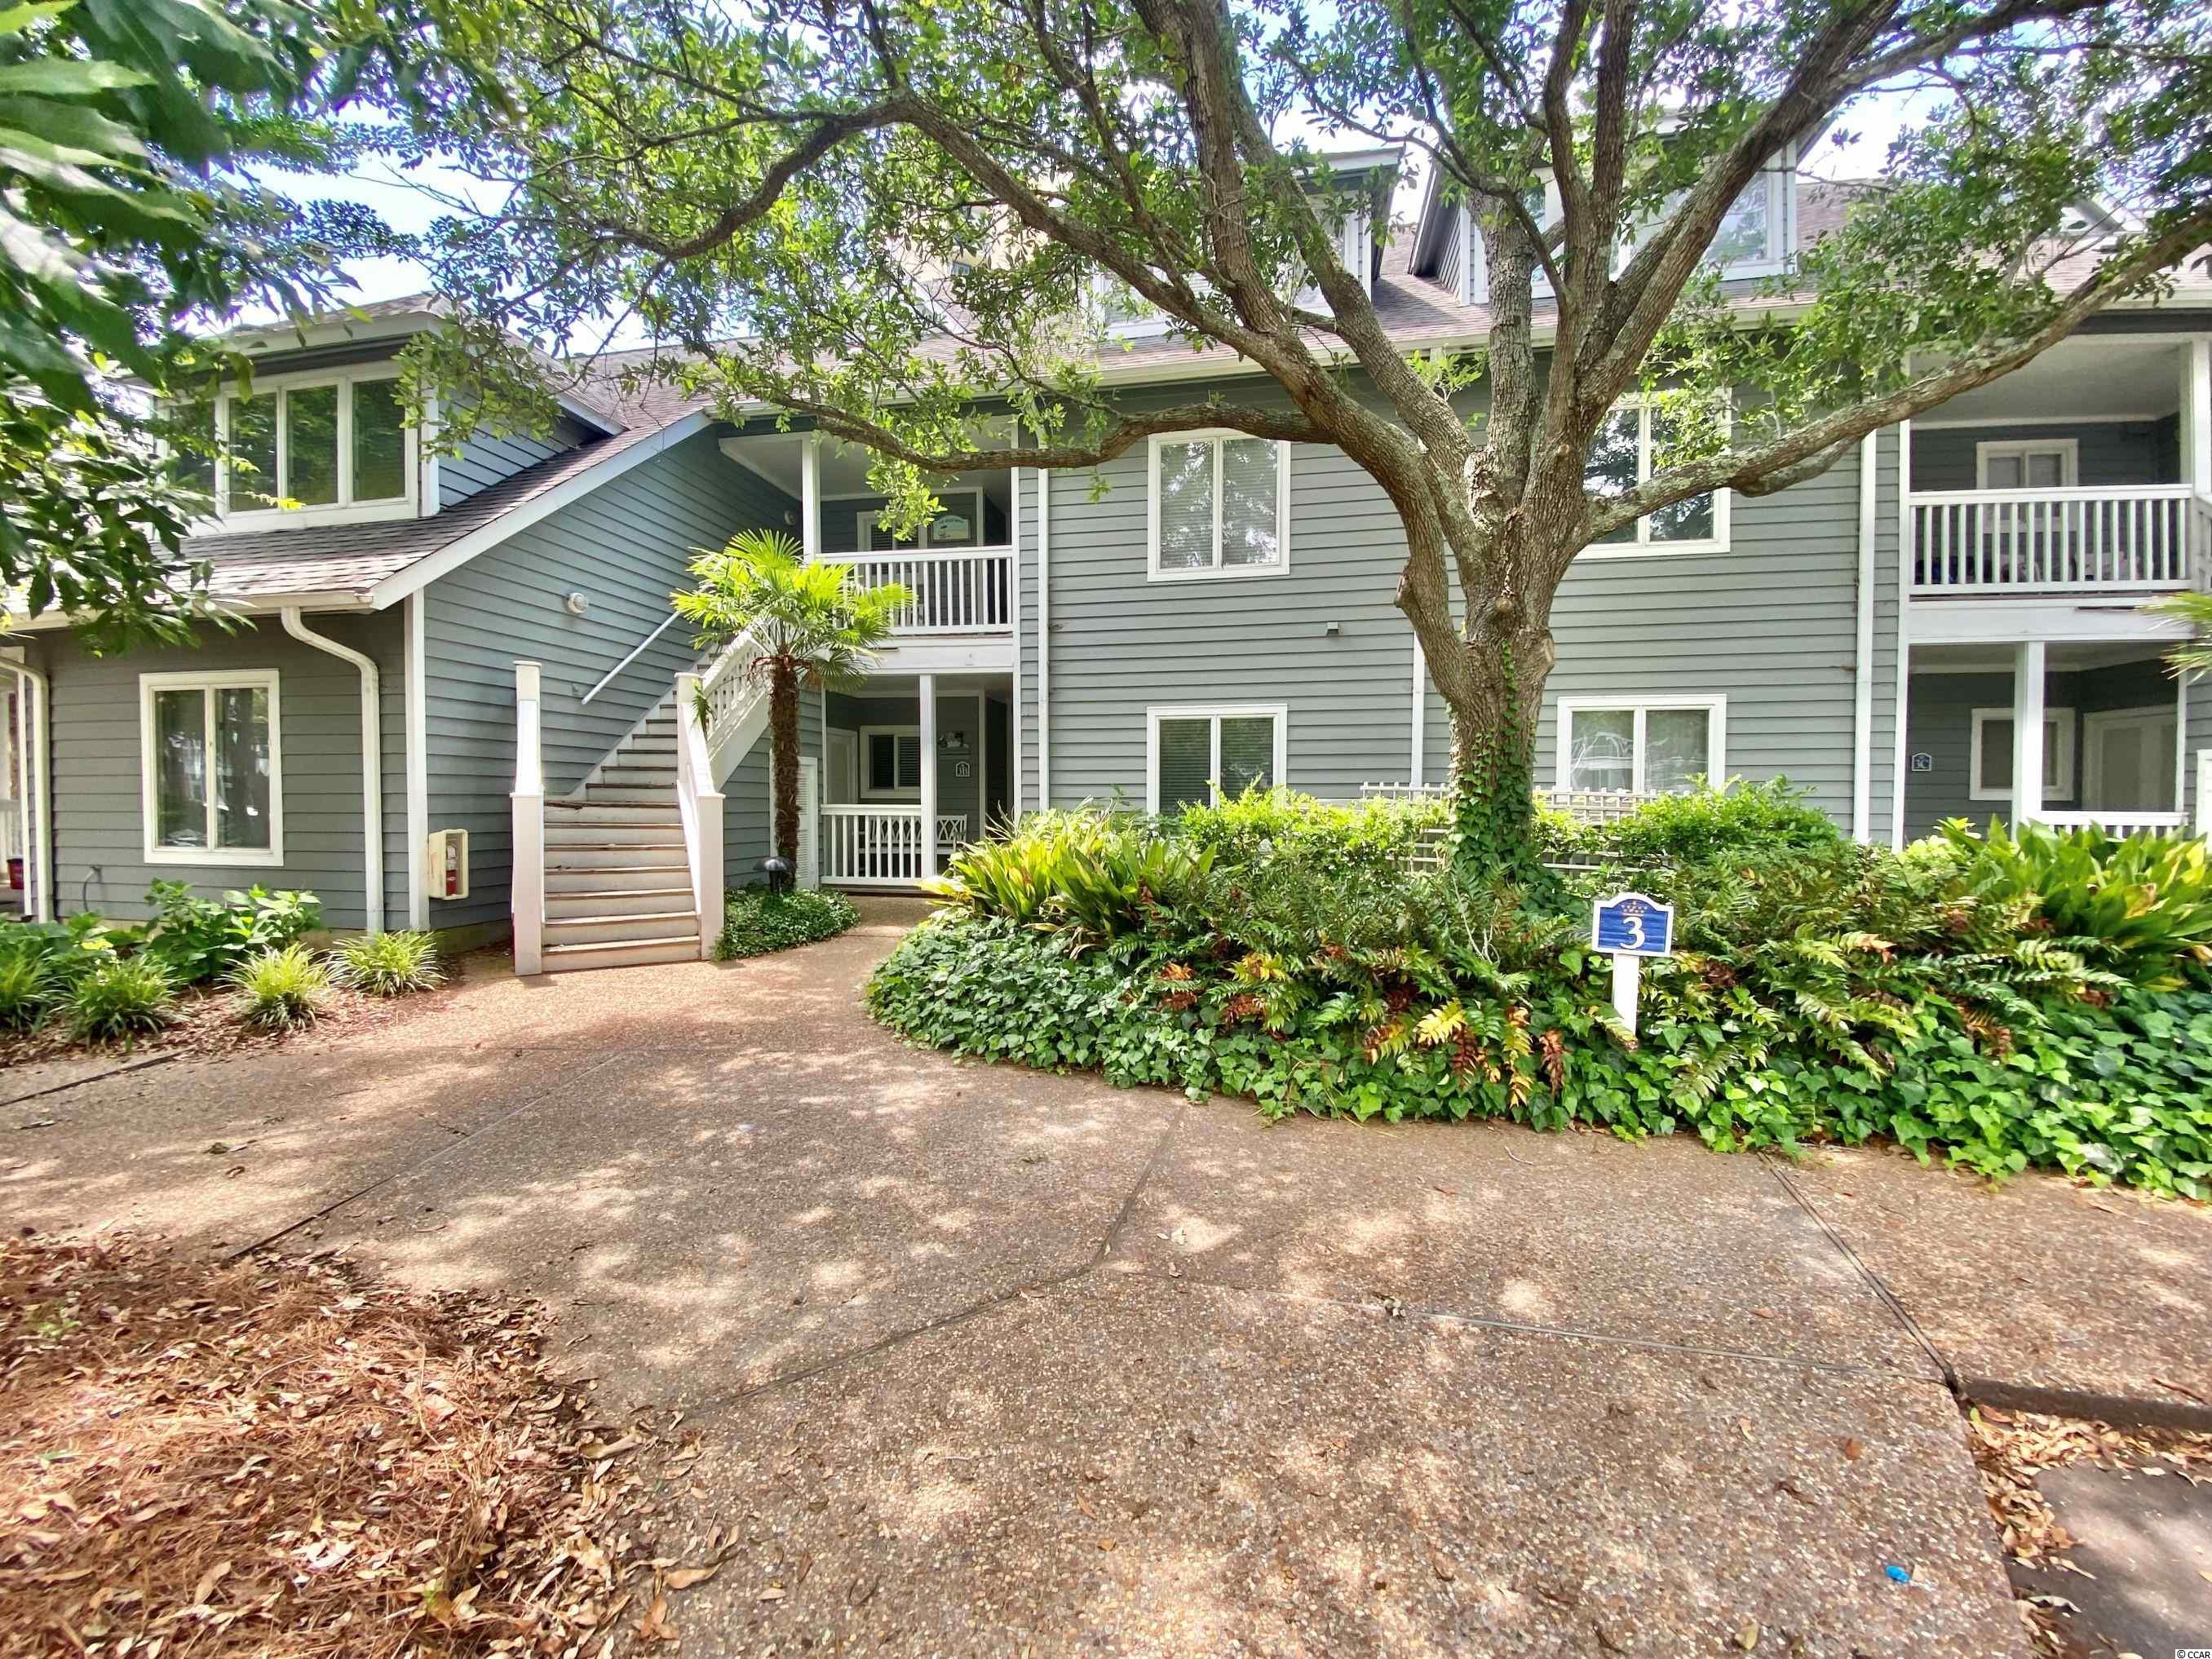 730 Windermere By the Sea Circle UNIT 3-B Myrtle Beach, SC 29572